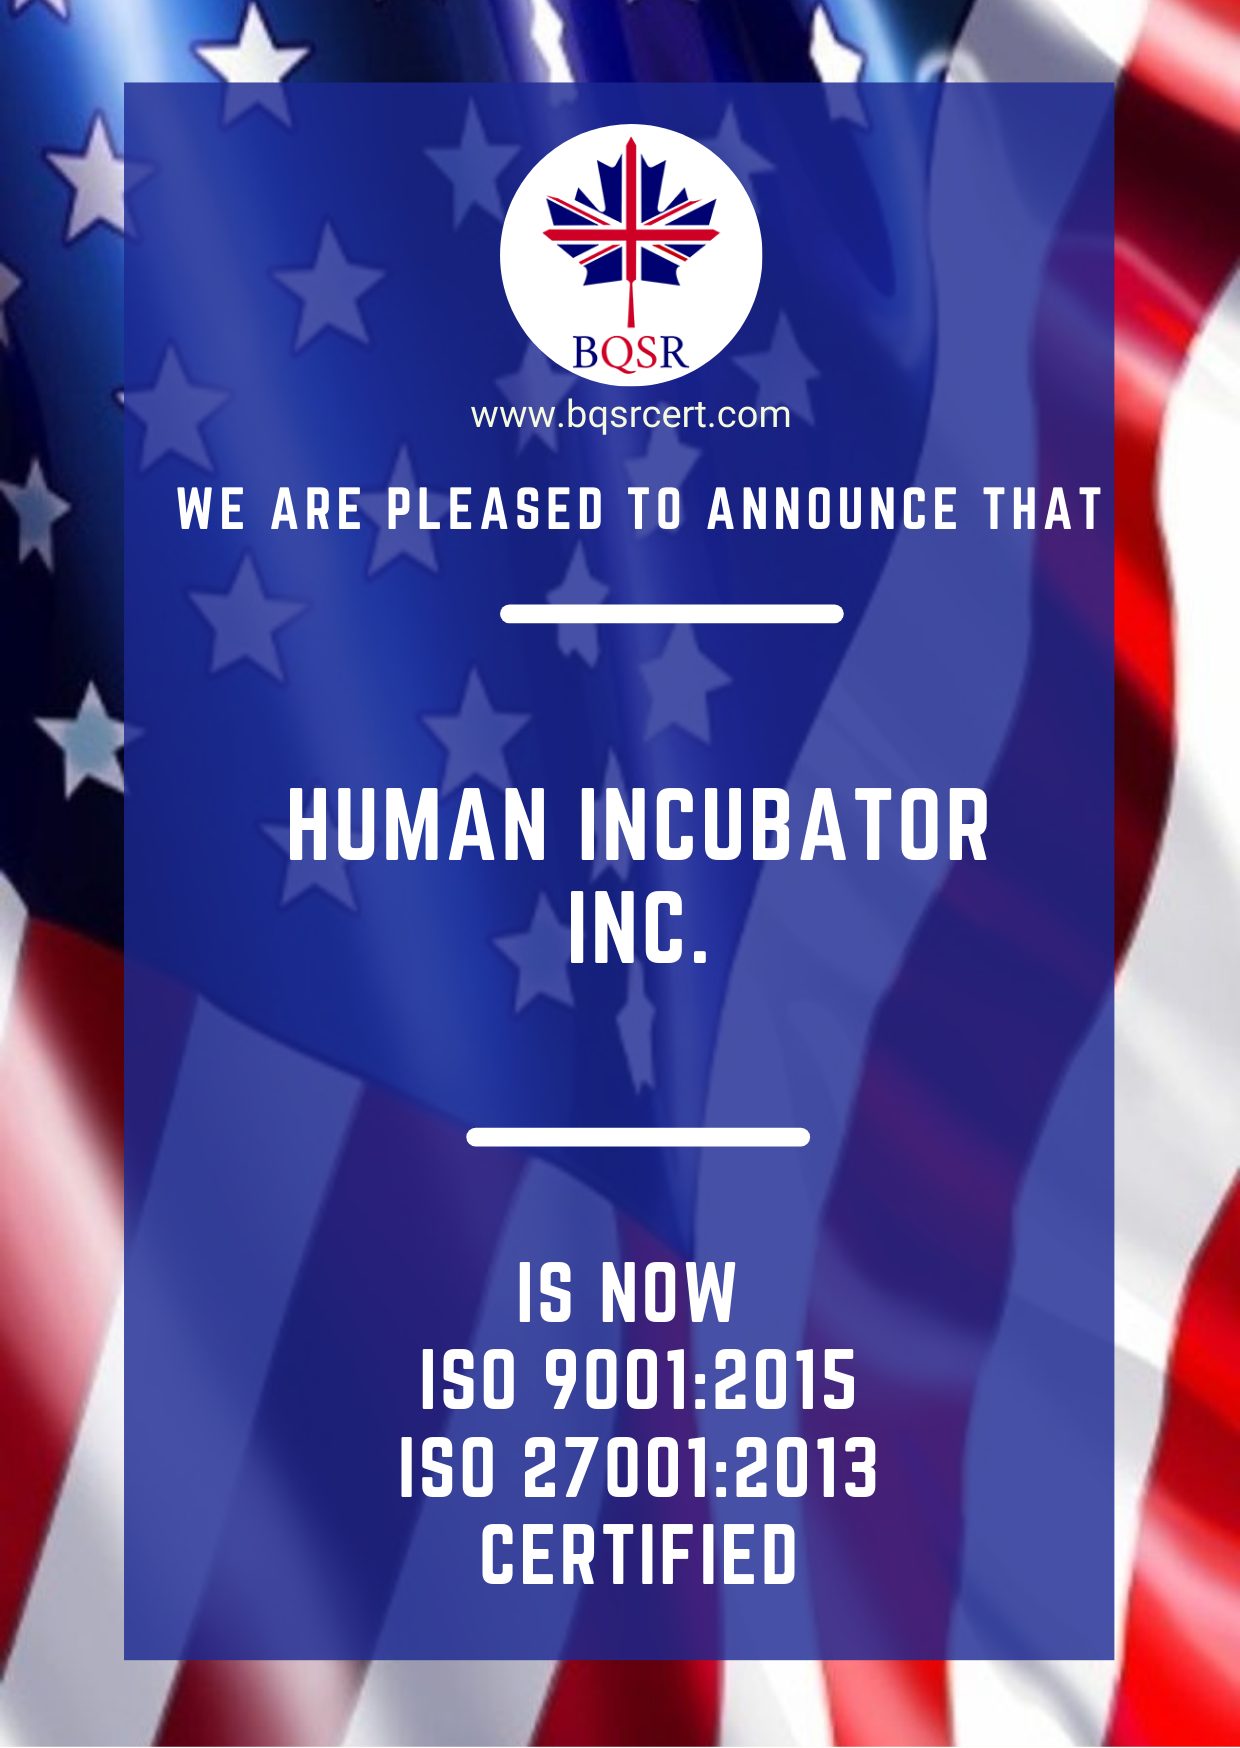 Human Incubator Inc. is now ISO 9001:2015 Quality Management System Certified